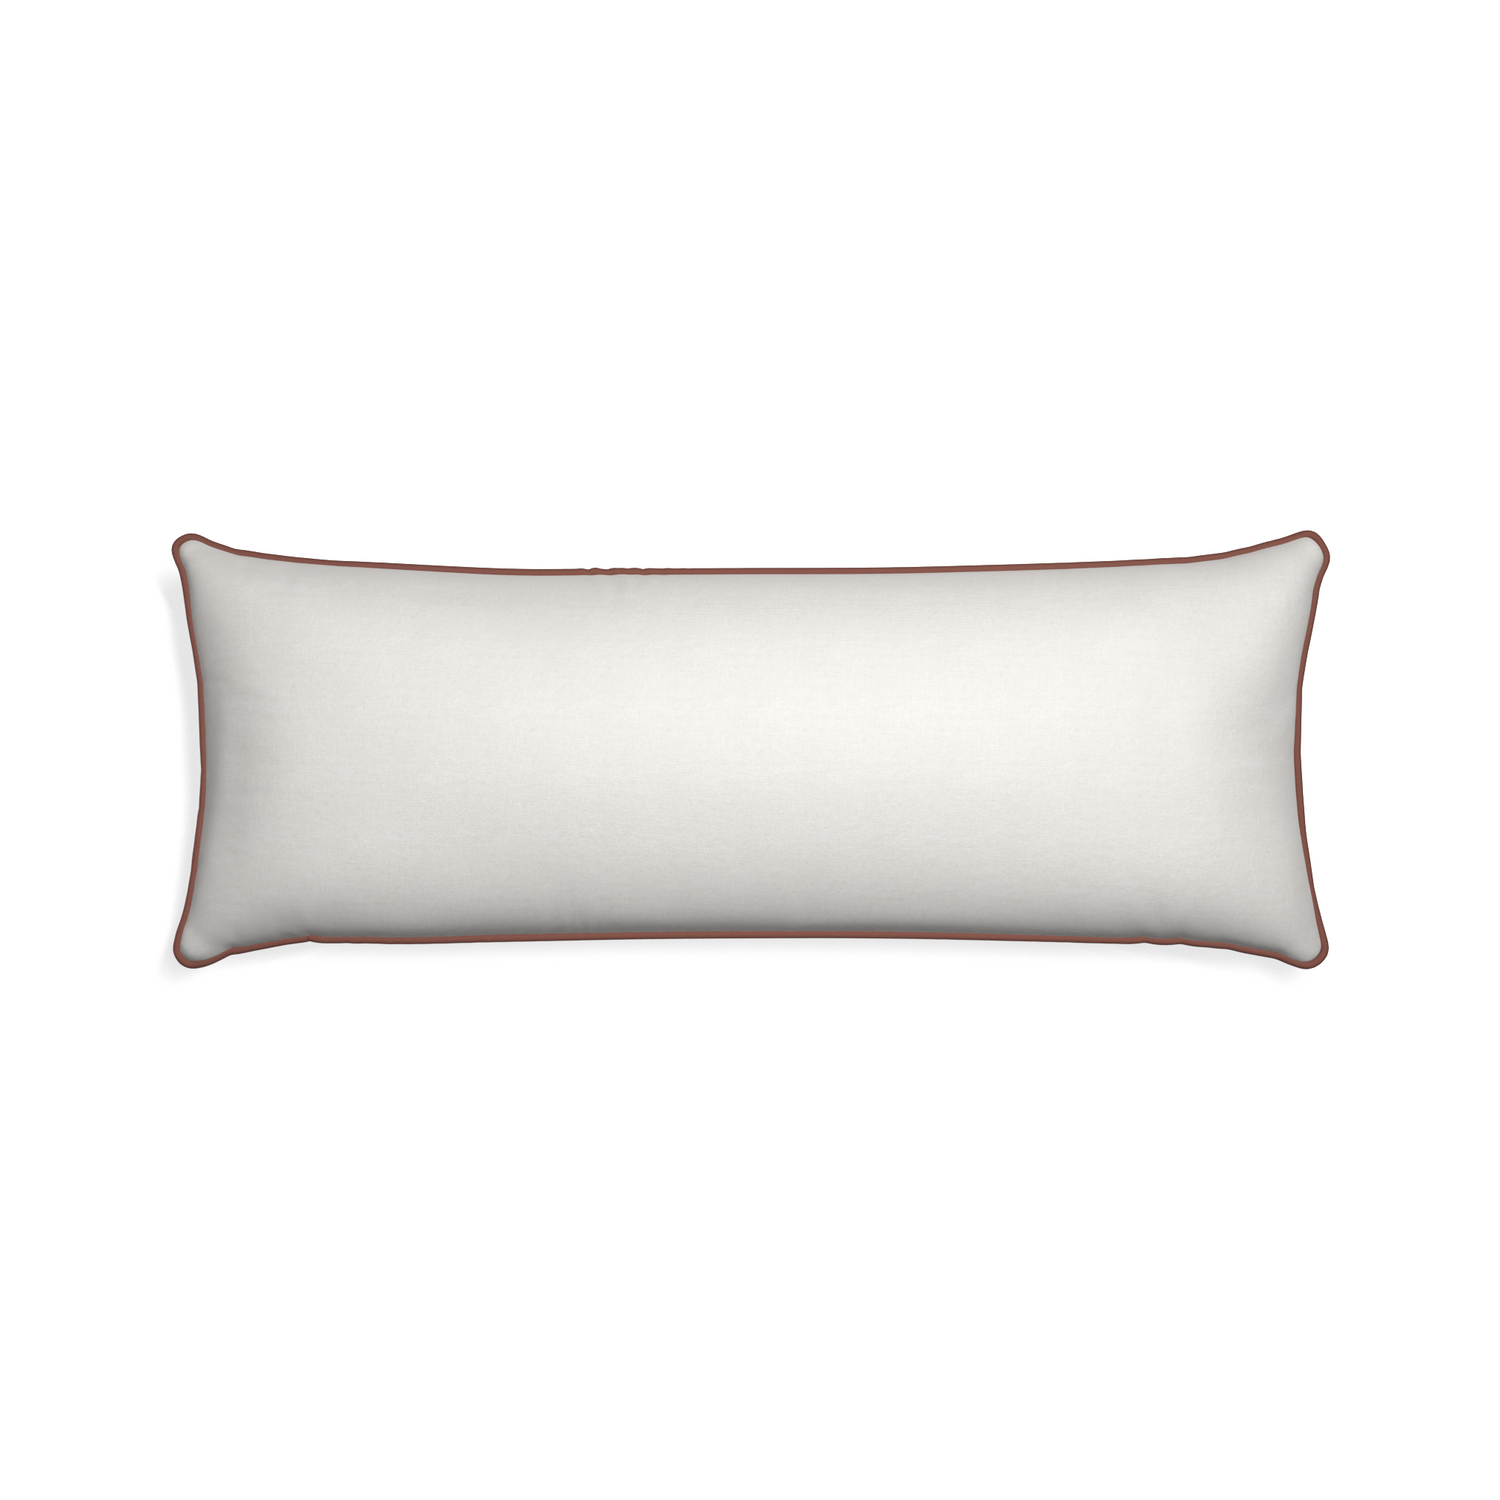 Xl-lumbar flour custom pillow with w piping on white background